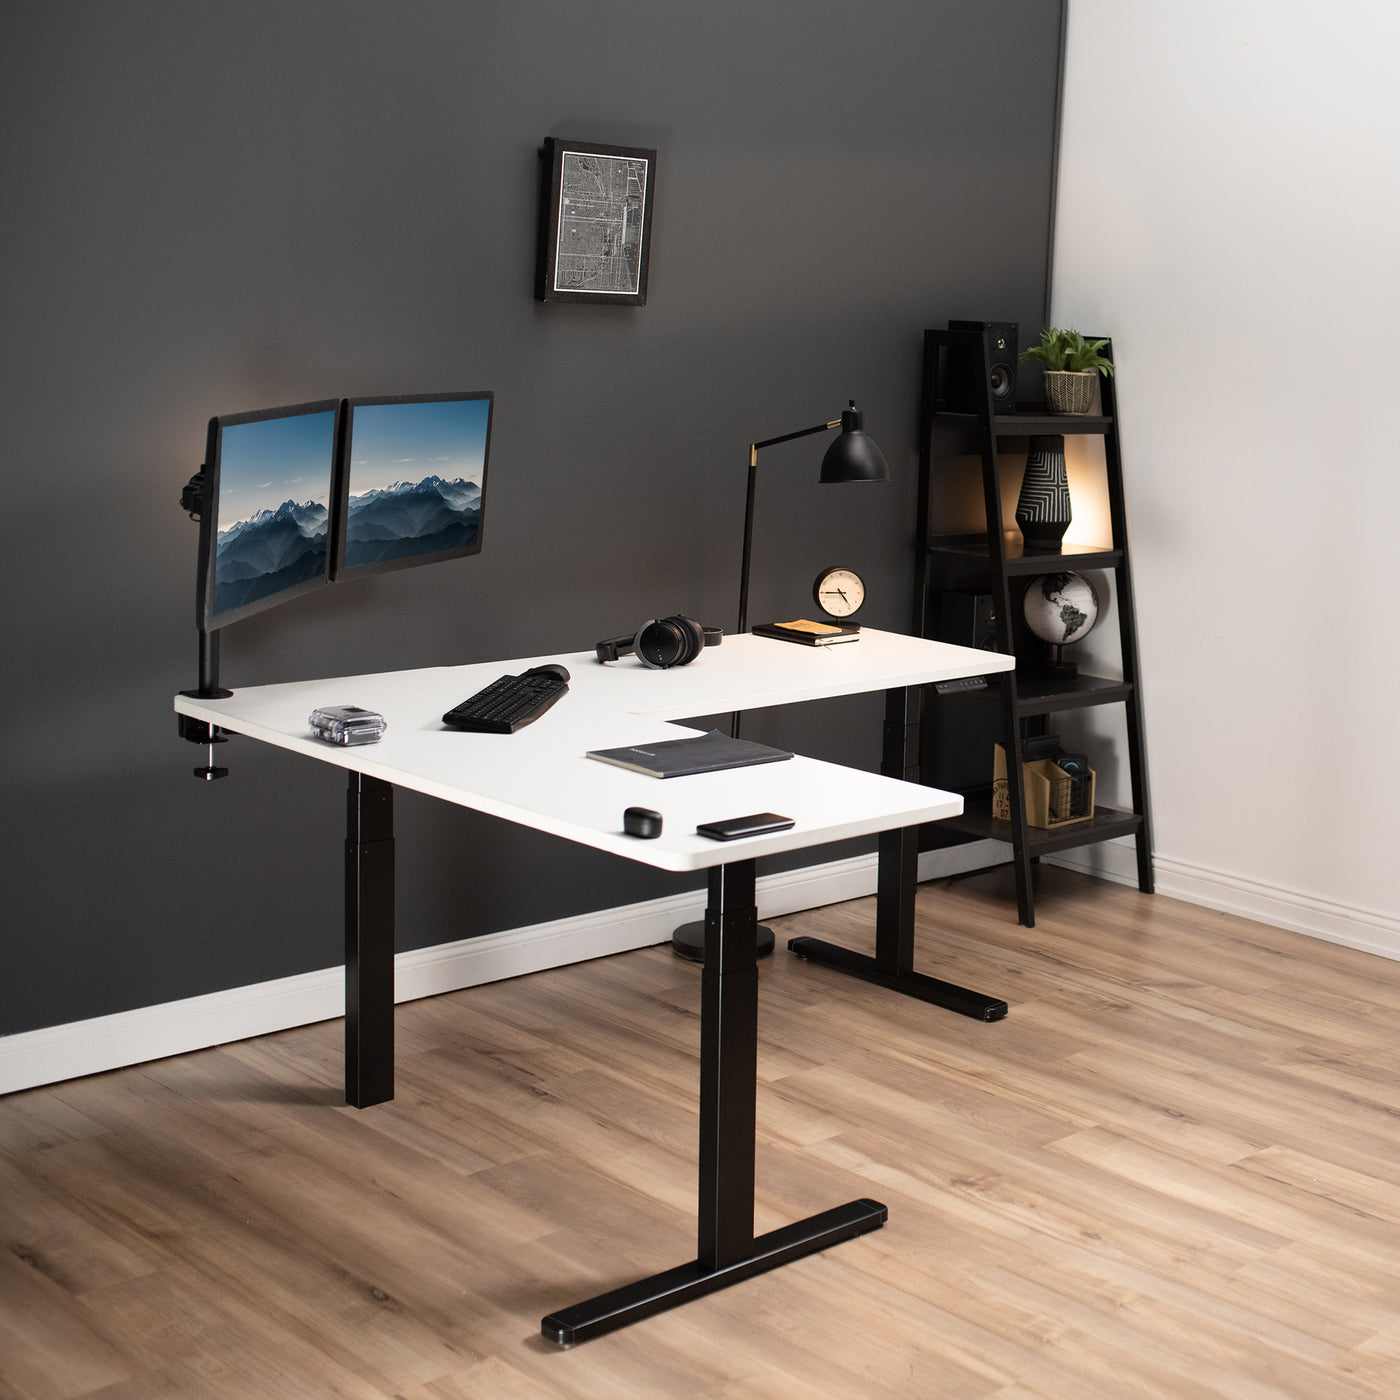 Sit or stand, 3 stage column heavy-duty L-shaped corner desk from VIVO.